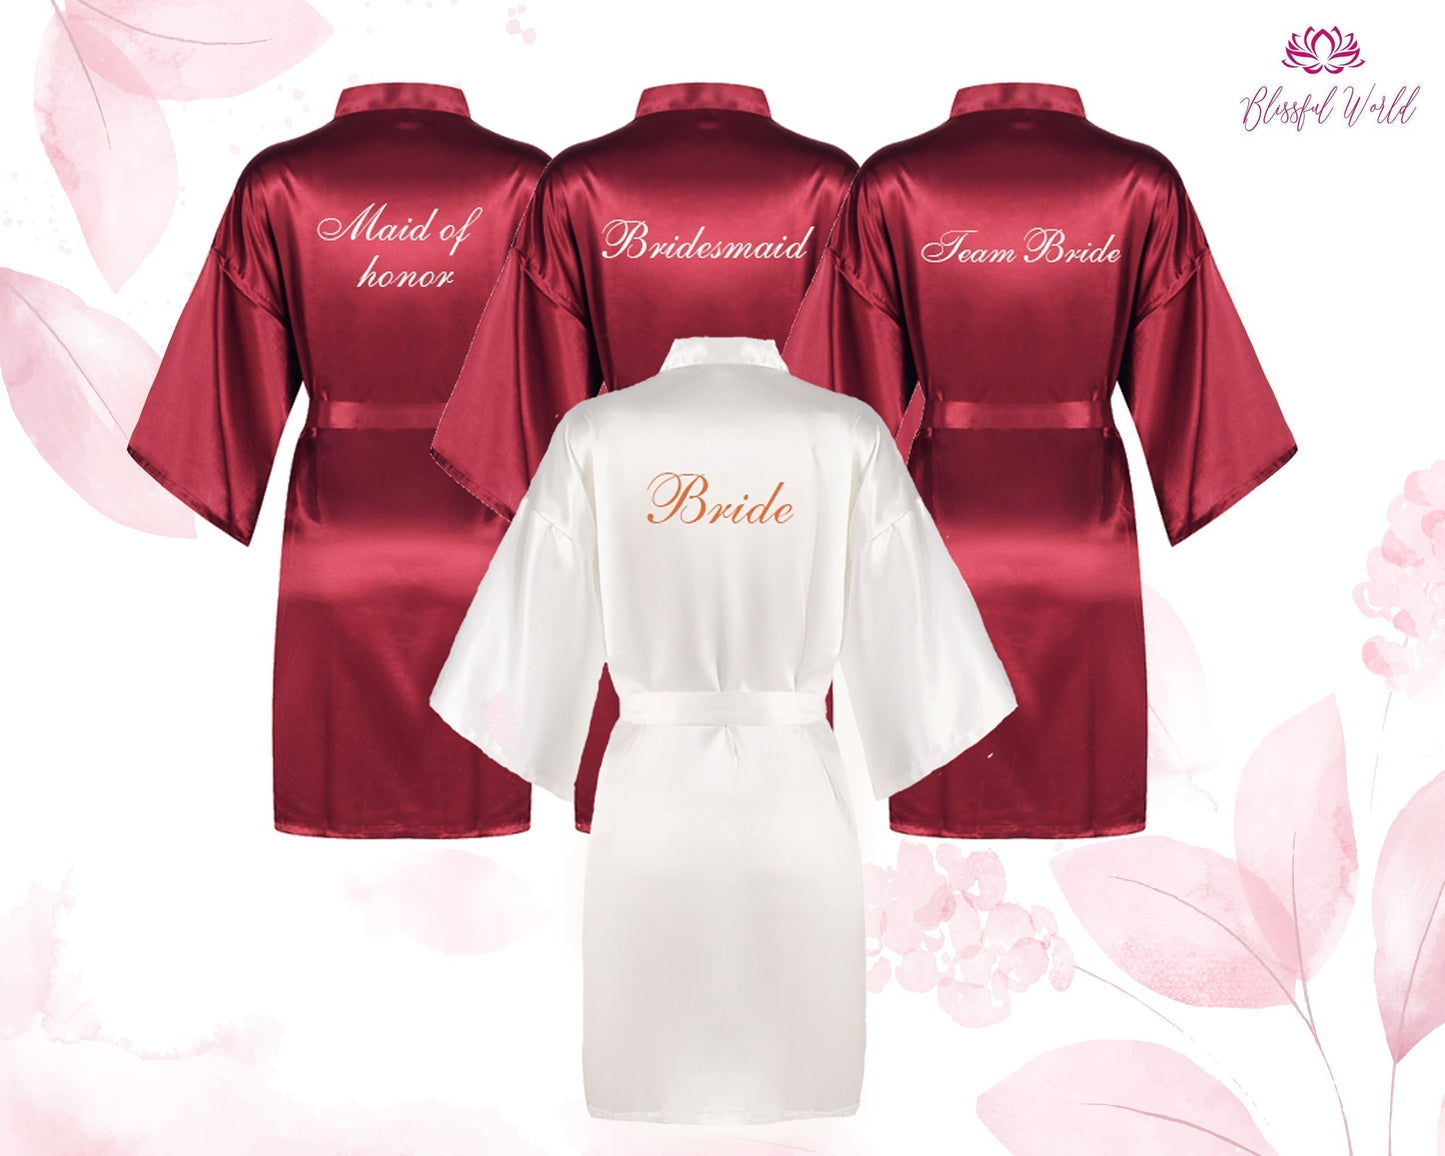 Bridesmaid dressing gowns| Wedding Party Robes| Silky Robe |Personalized Bridesmaid Robes| Satin Robes| Bridesmaid Robes| Green Robe| Rosie| Robe| White Robes